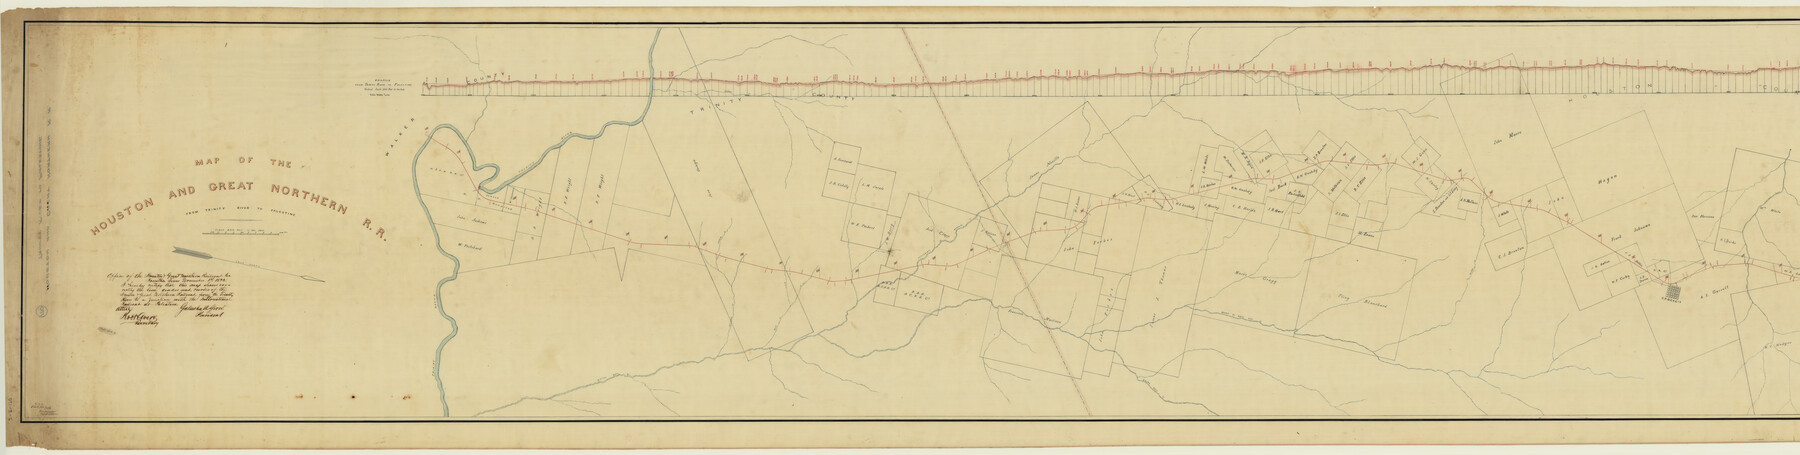 64549, Map of the Houston and Great Northern R.R. from Trinity River to Palestine, General Map Collection